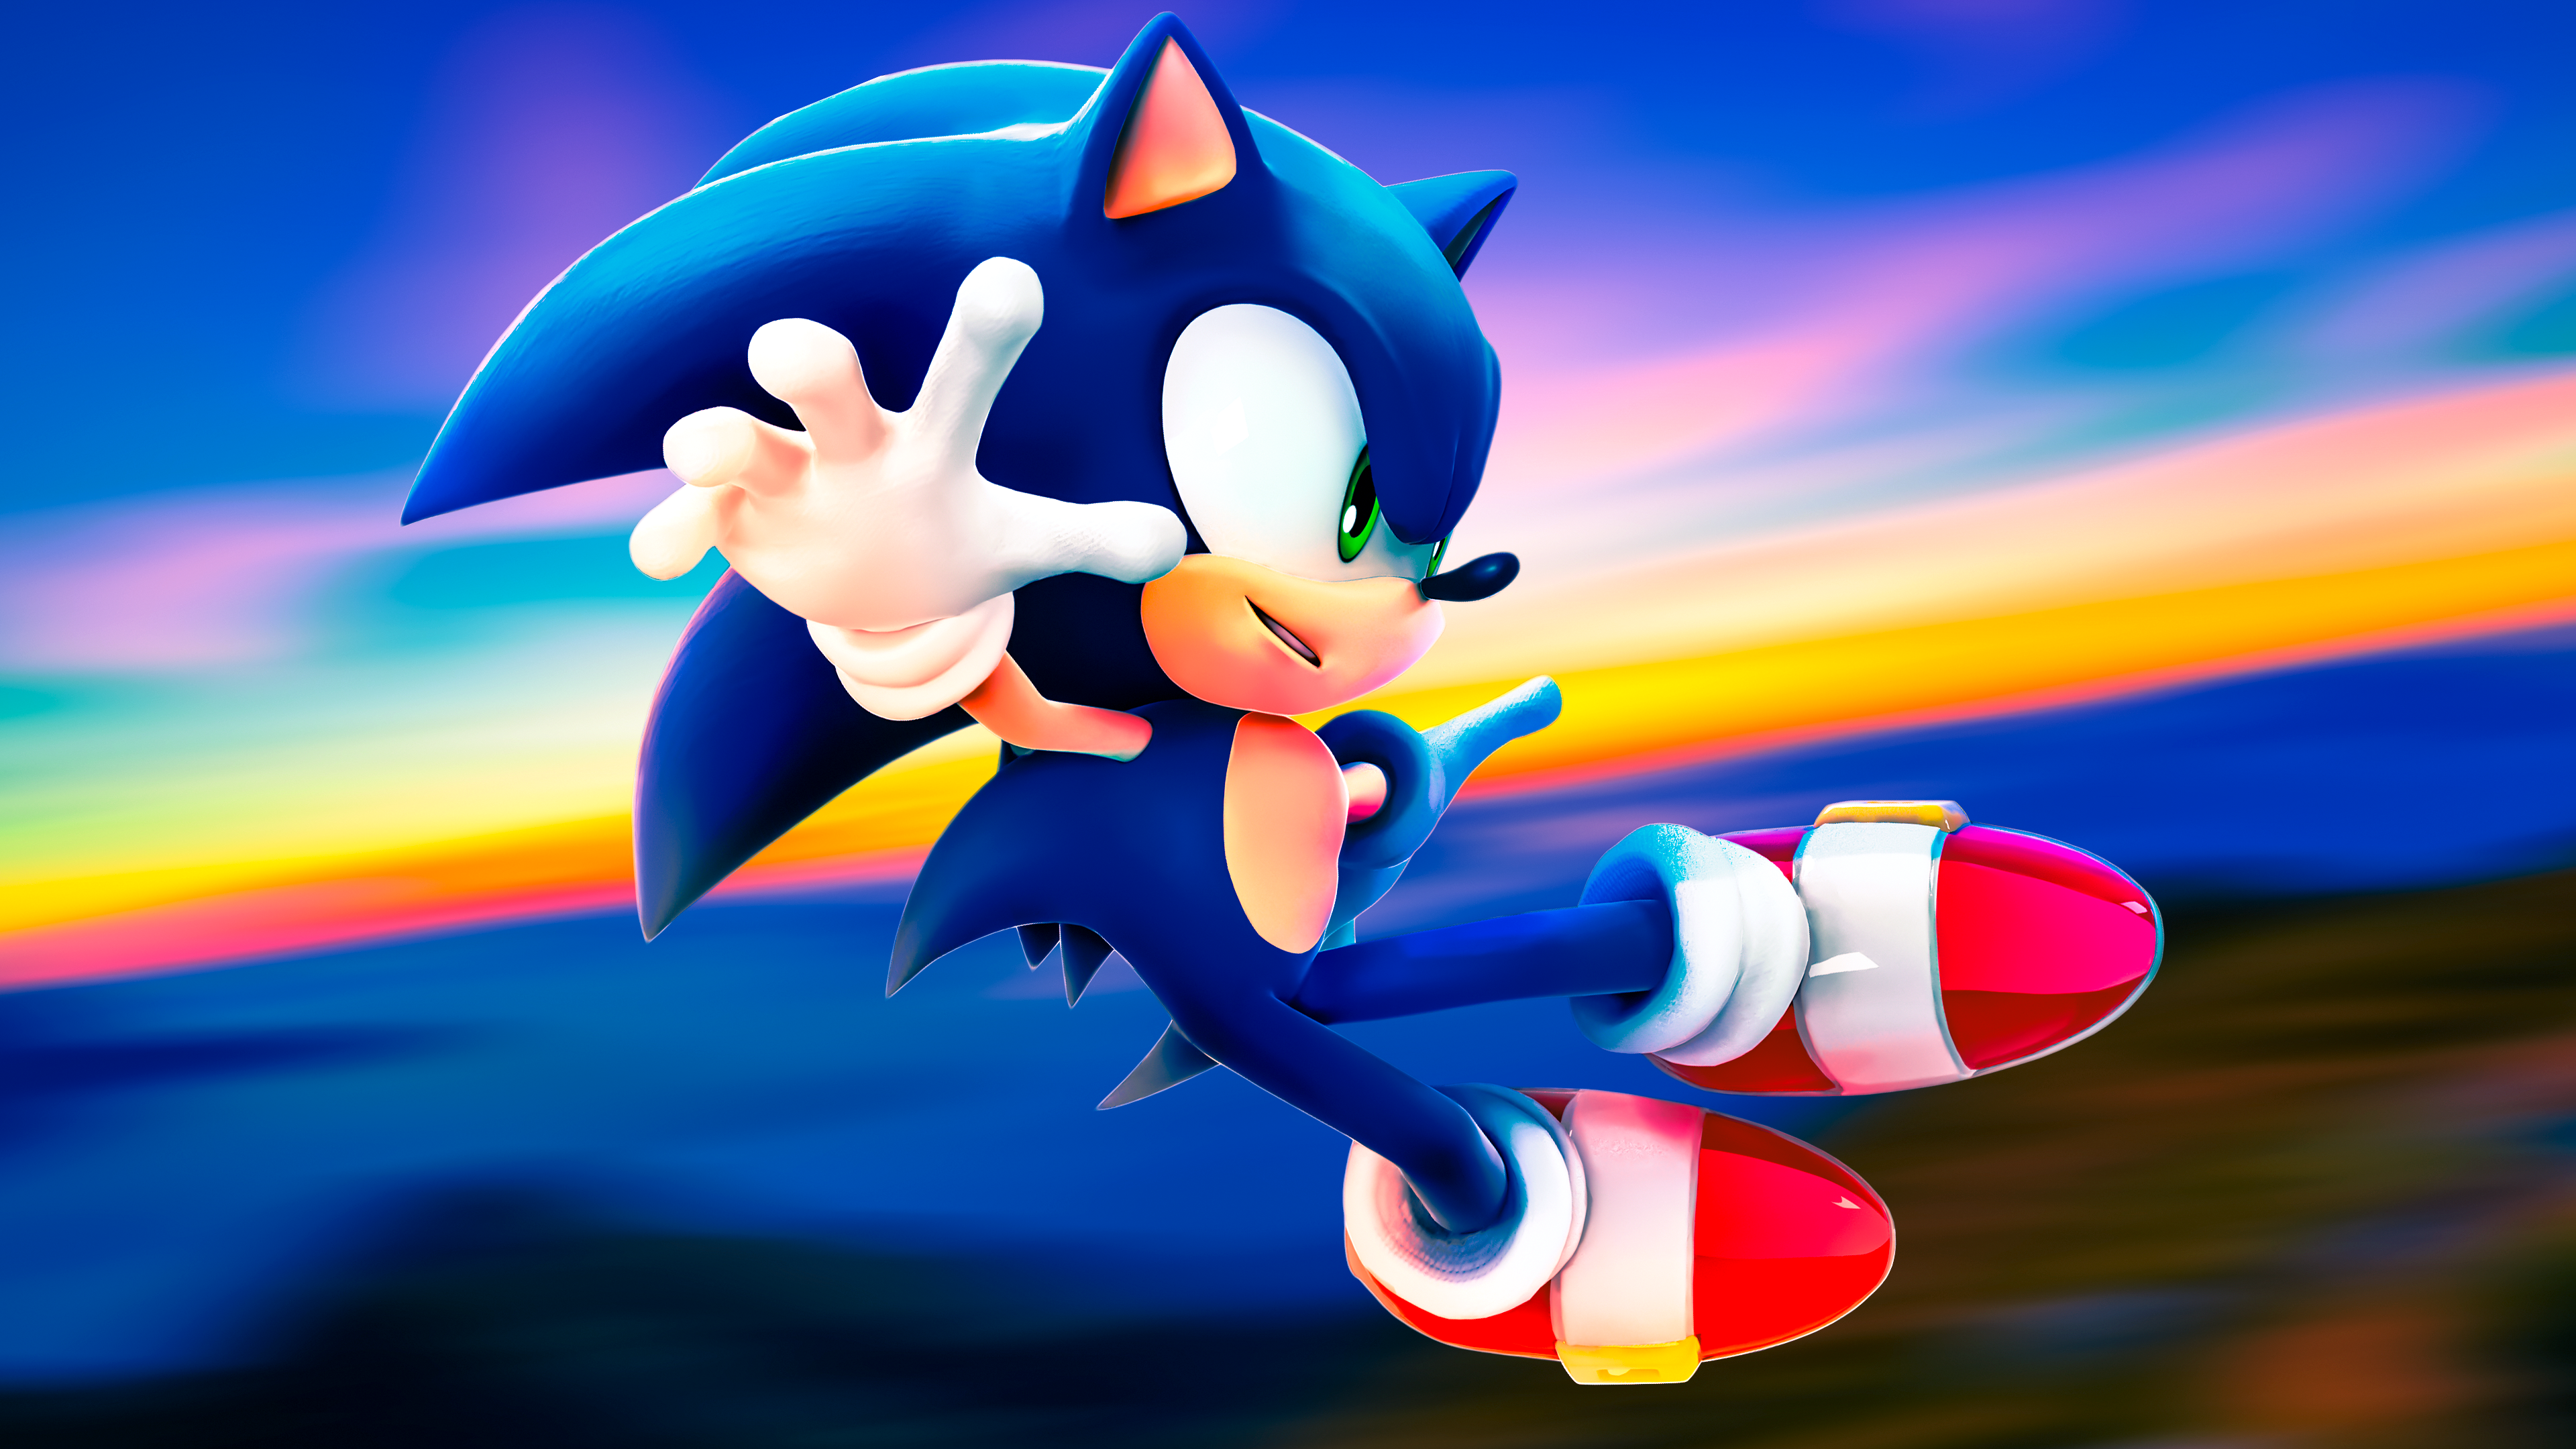 Sonic the Hedgehog by Light-Rock by Light-Rock